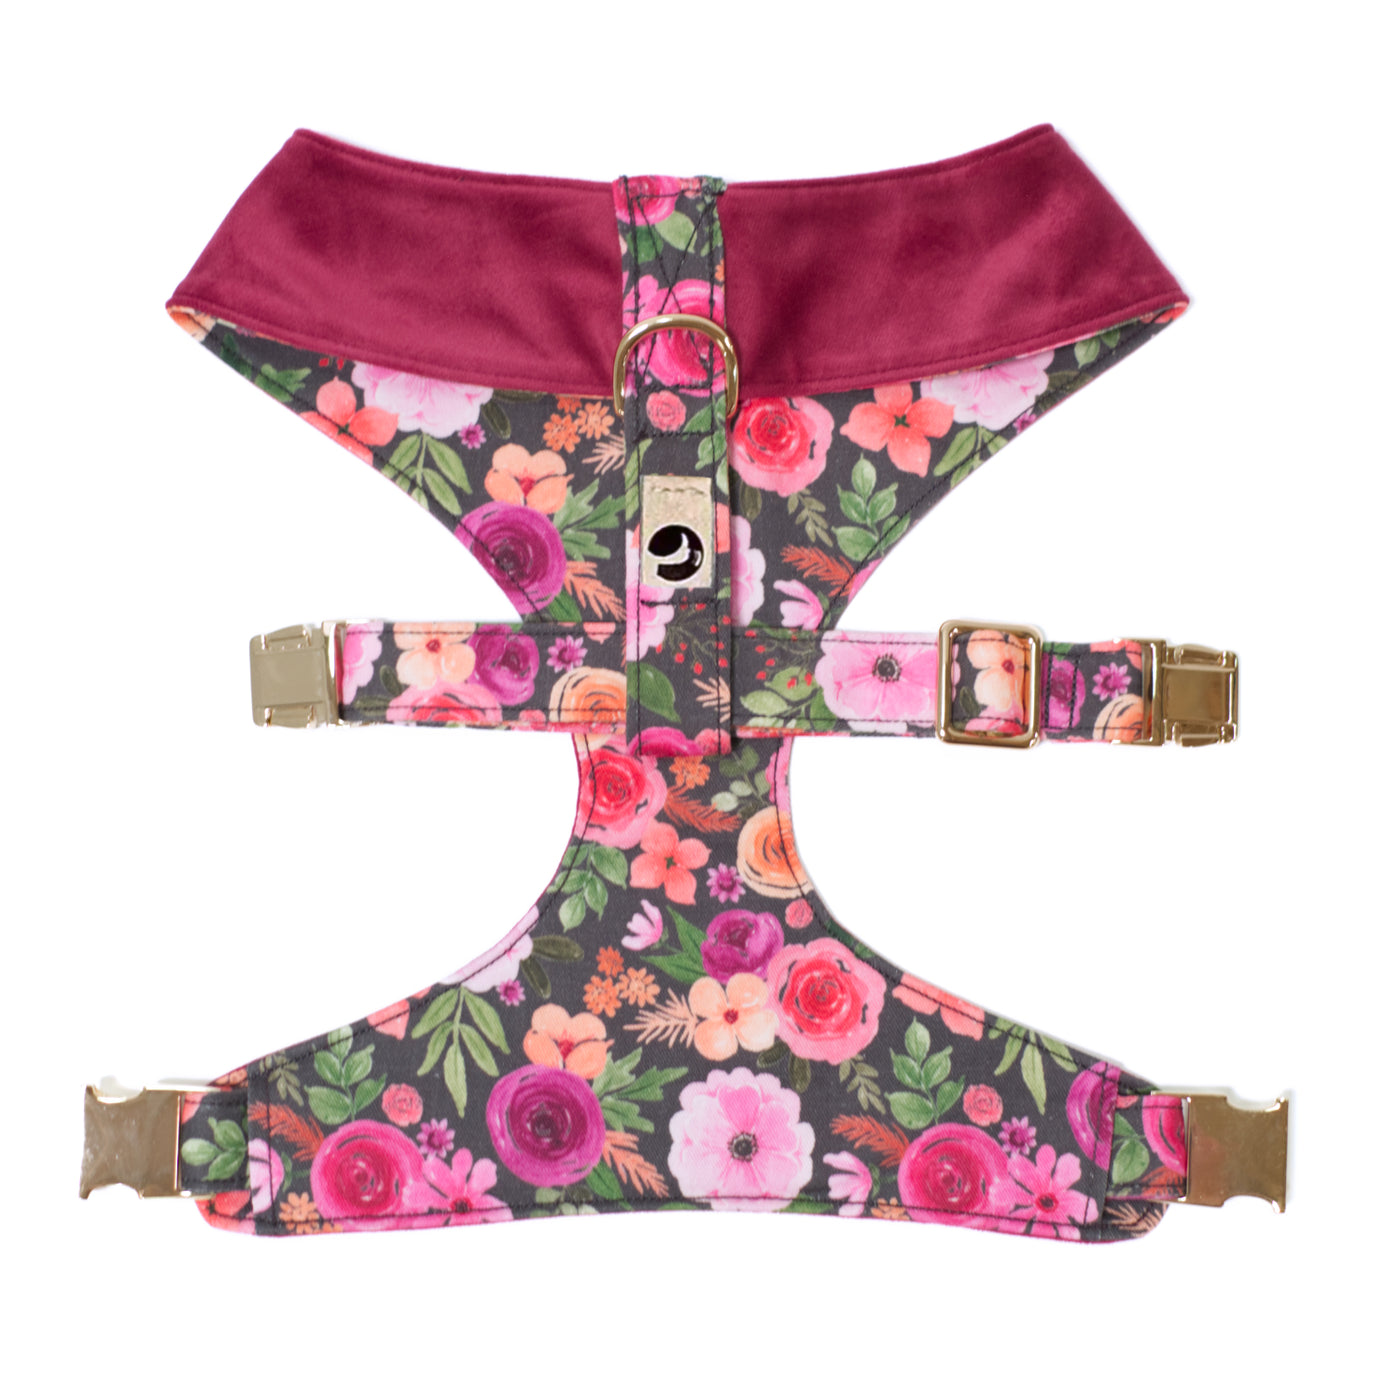 Top/back view of wine and floral reversible dog harness with gold hardware